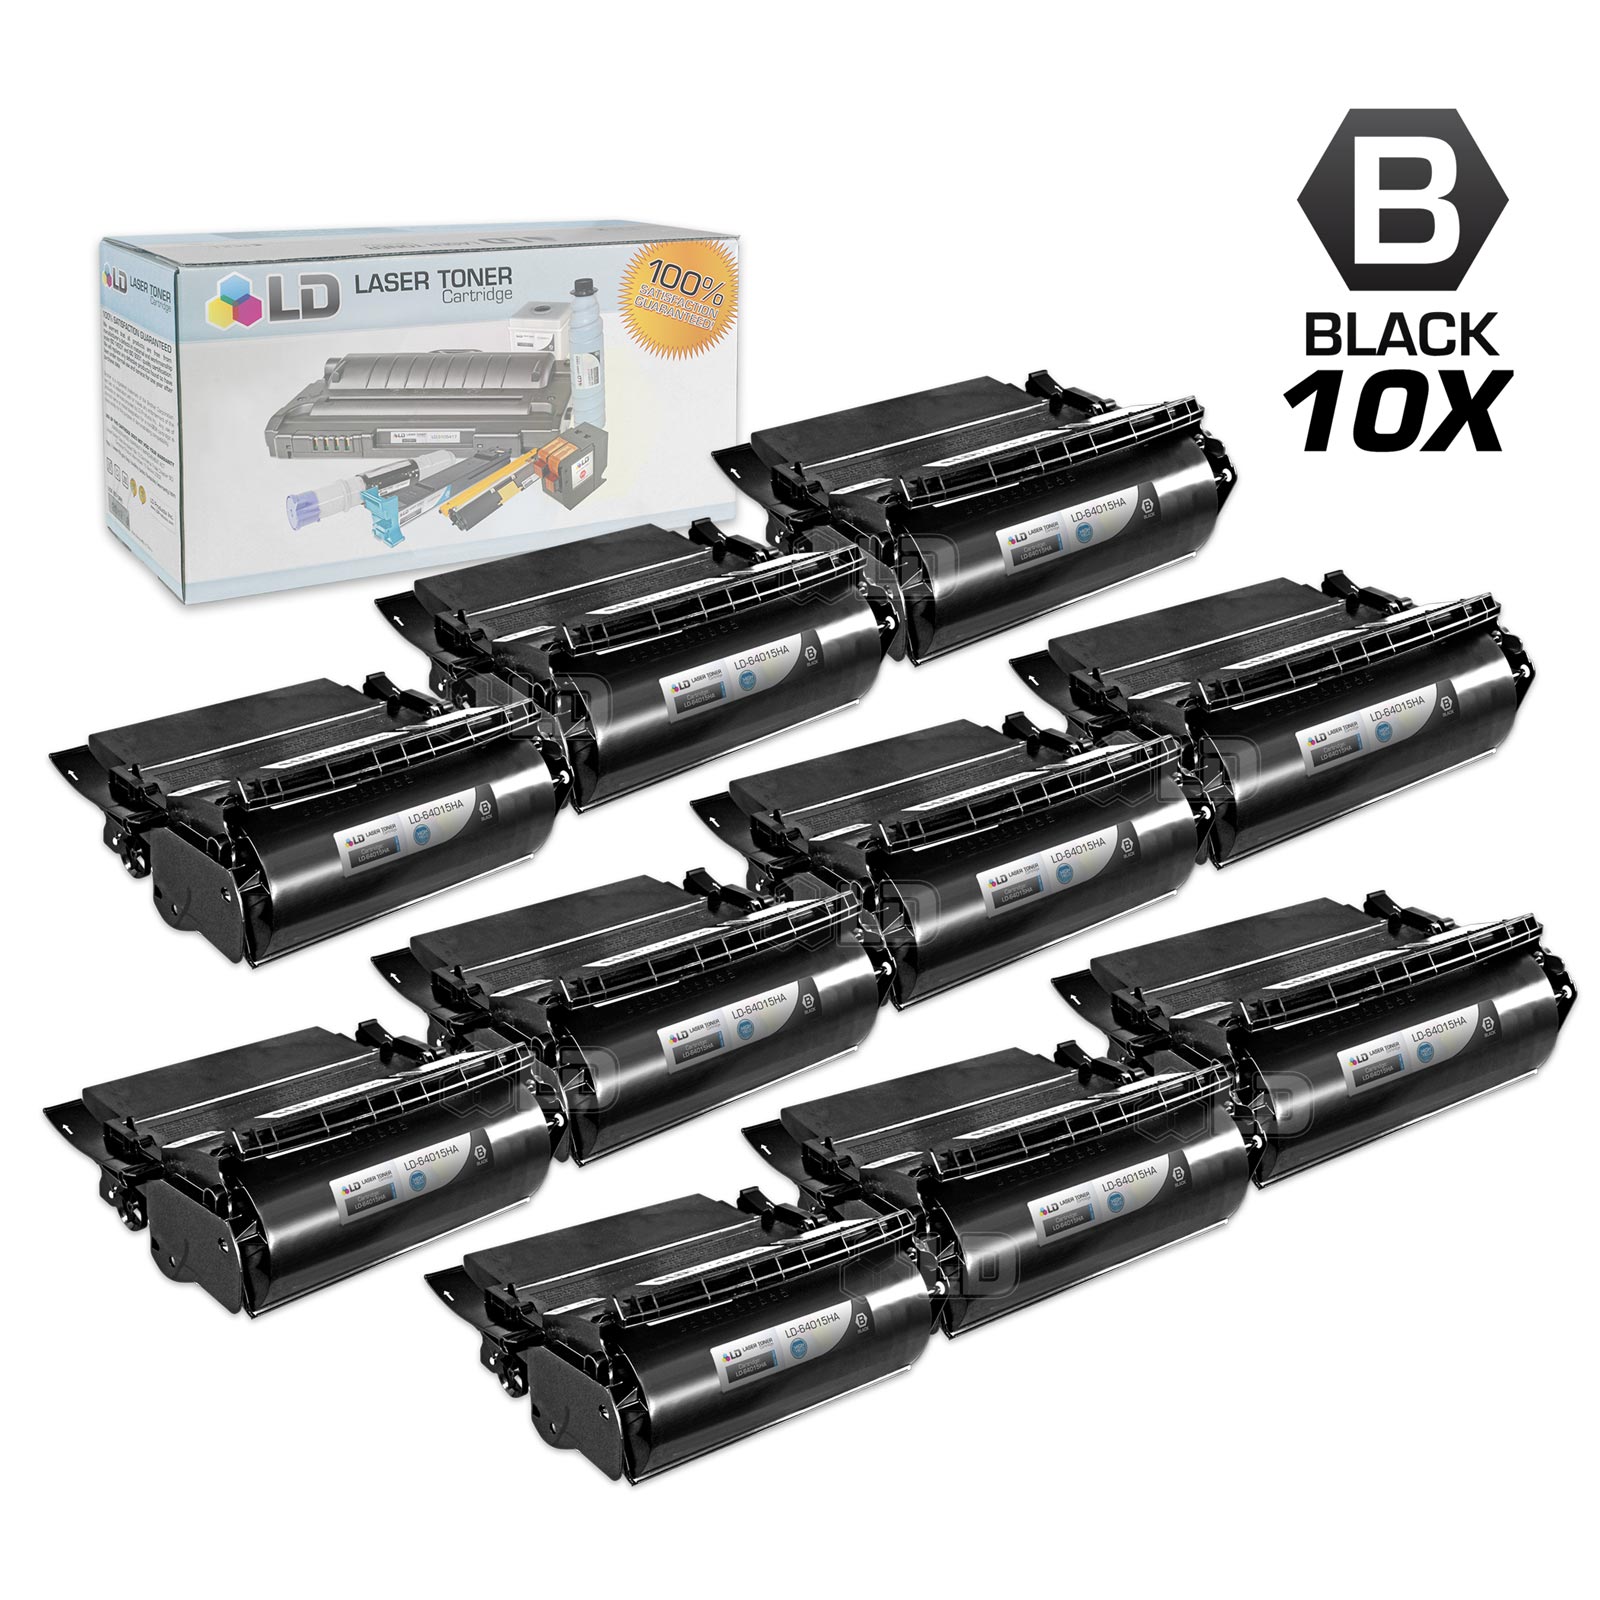 LD Compatible Lexmark 64015HA Set of 10 Black Laser Toner Cartridges for use in the T644tn, T642dtn, T640, T642tn, T640dtn, T644dn, T640tn, T644n, T642dn, T642n, T640dn, T644, T640n, T644dtn, T642 - image 1 of 1